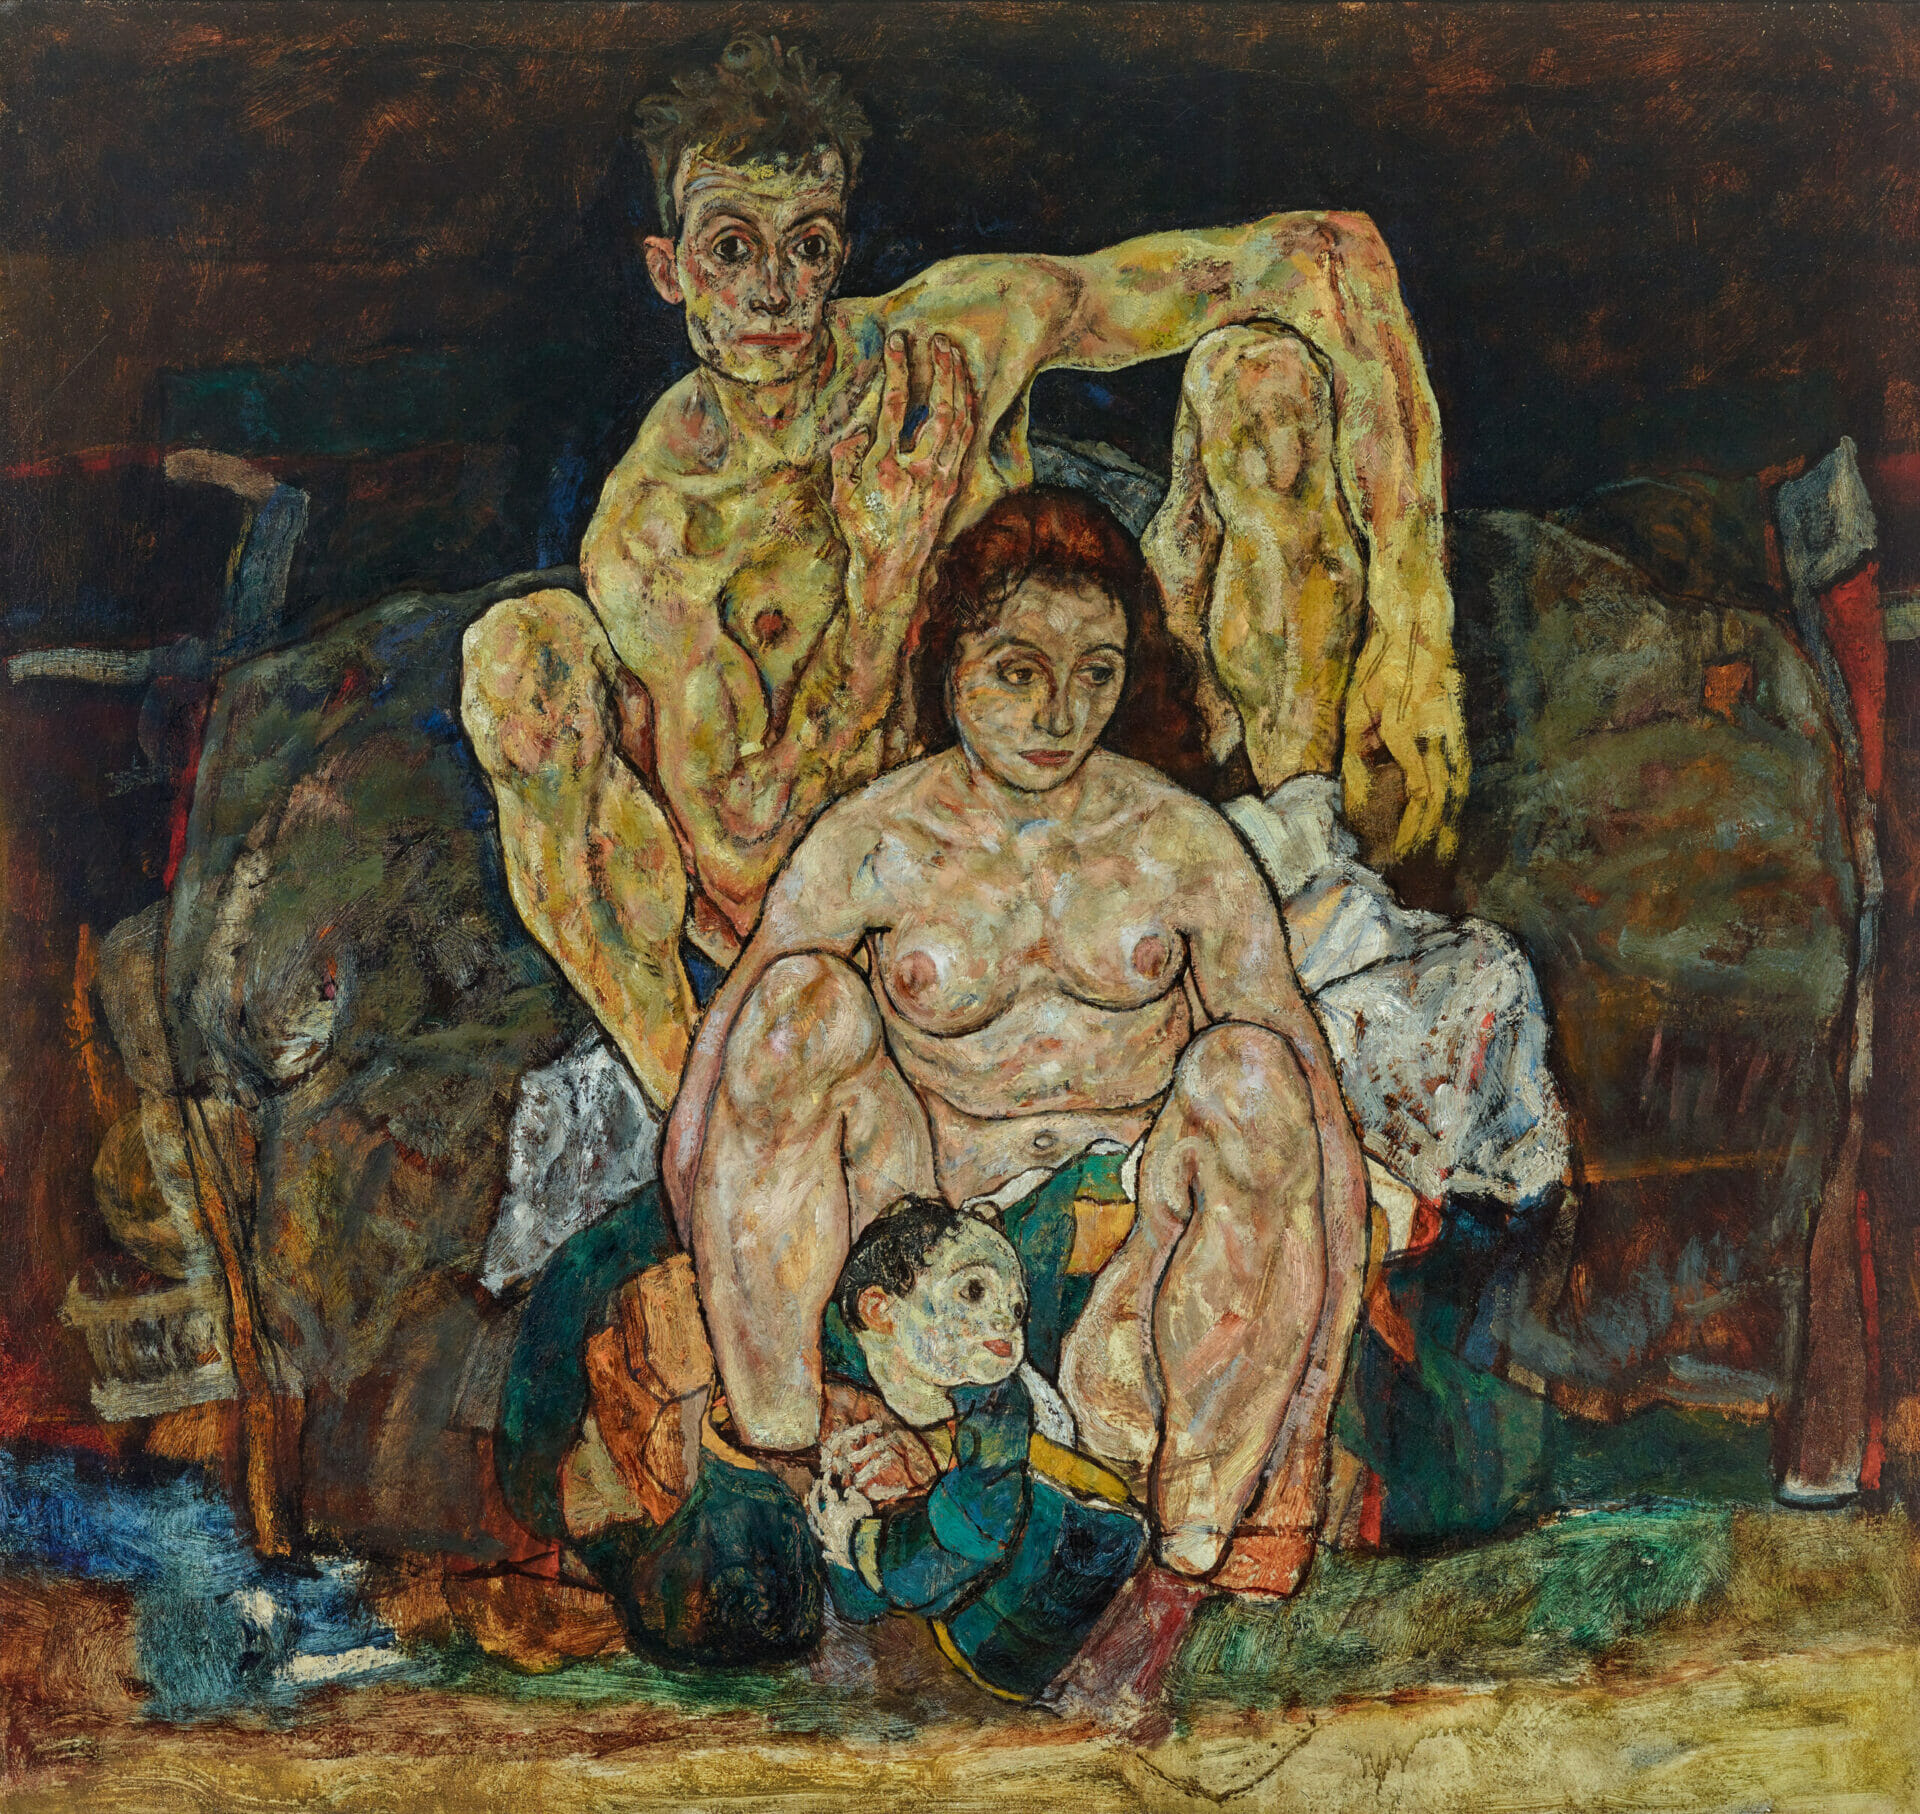 The Family | When Schiele's desire became a dark foreboding